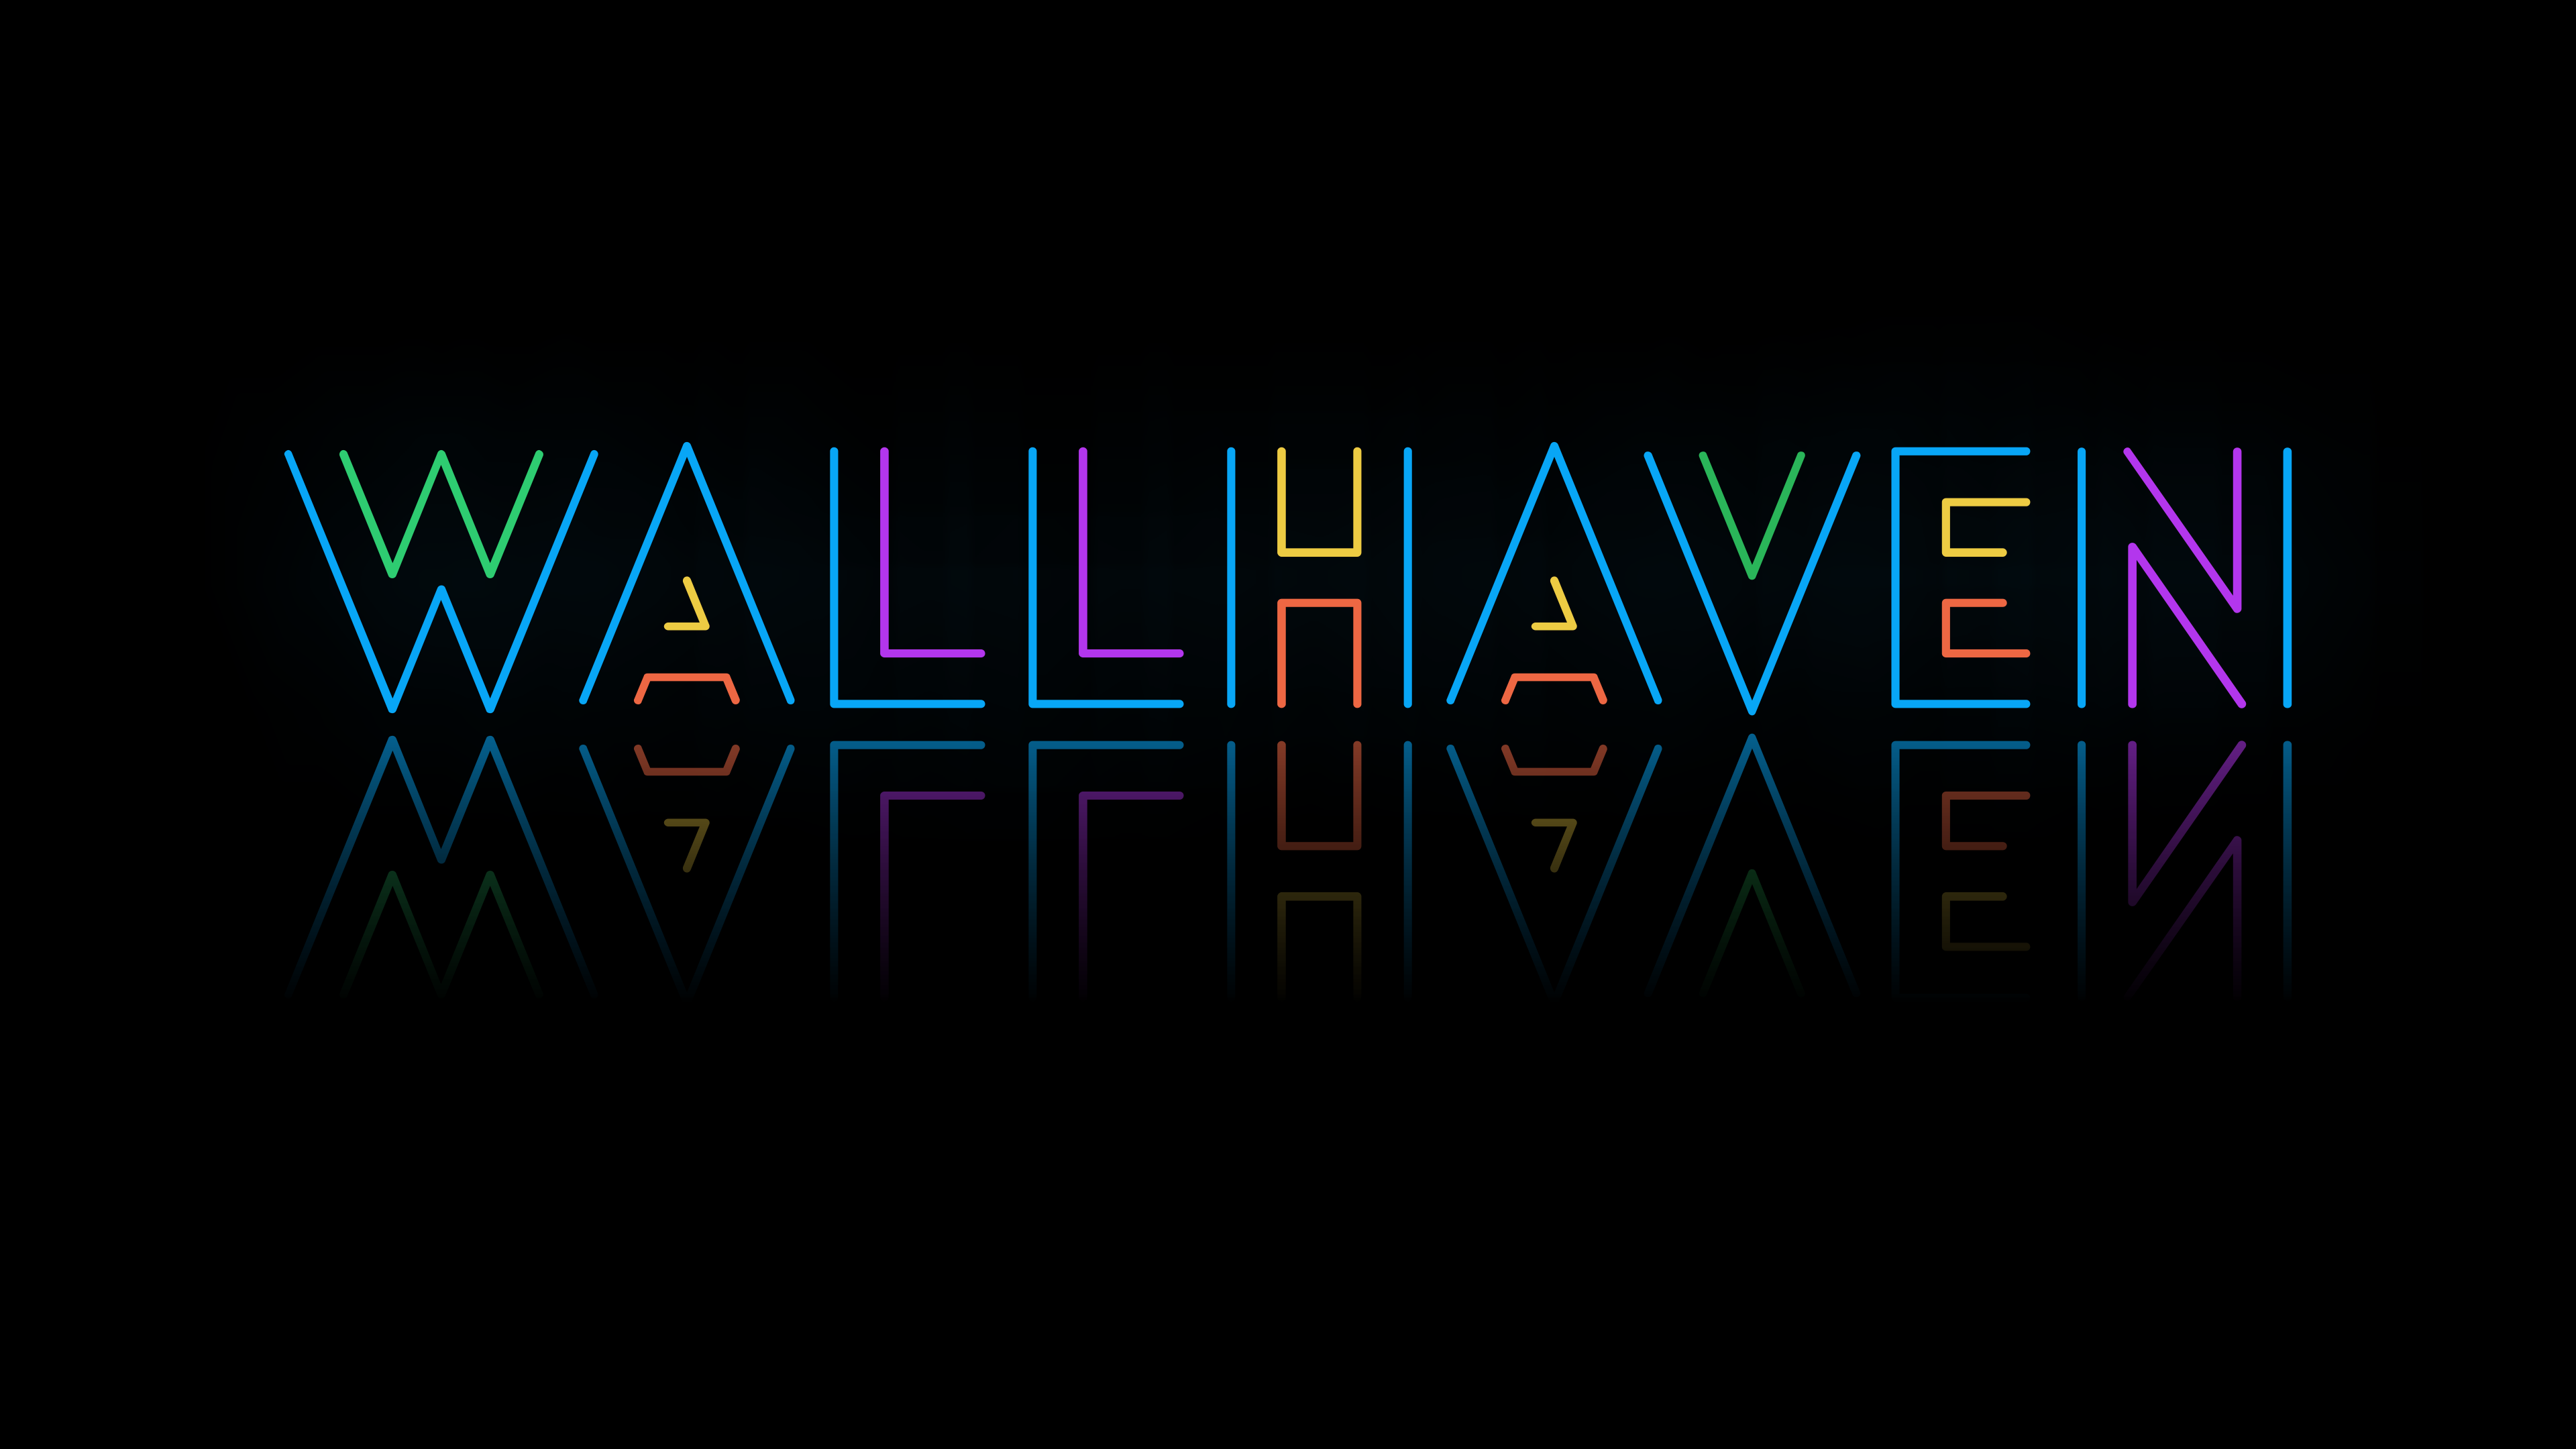 General 3840x2160 wallhaven black background reflection colorful digital art simple background lines